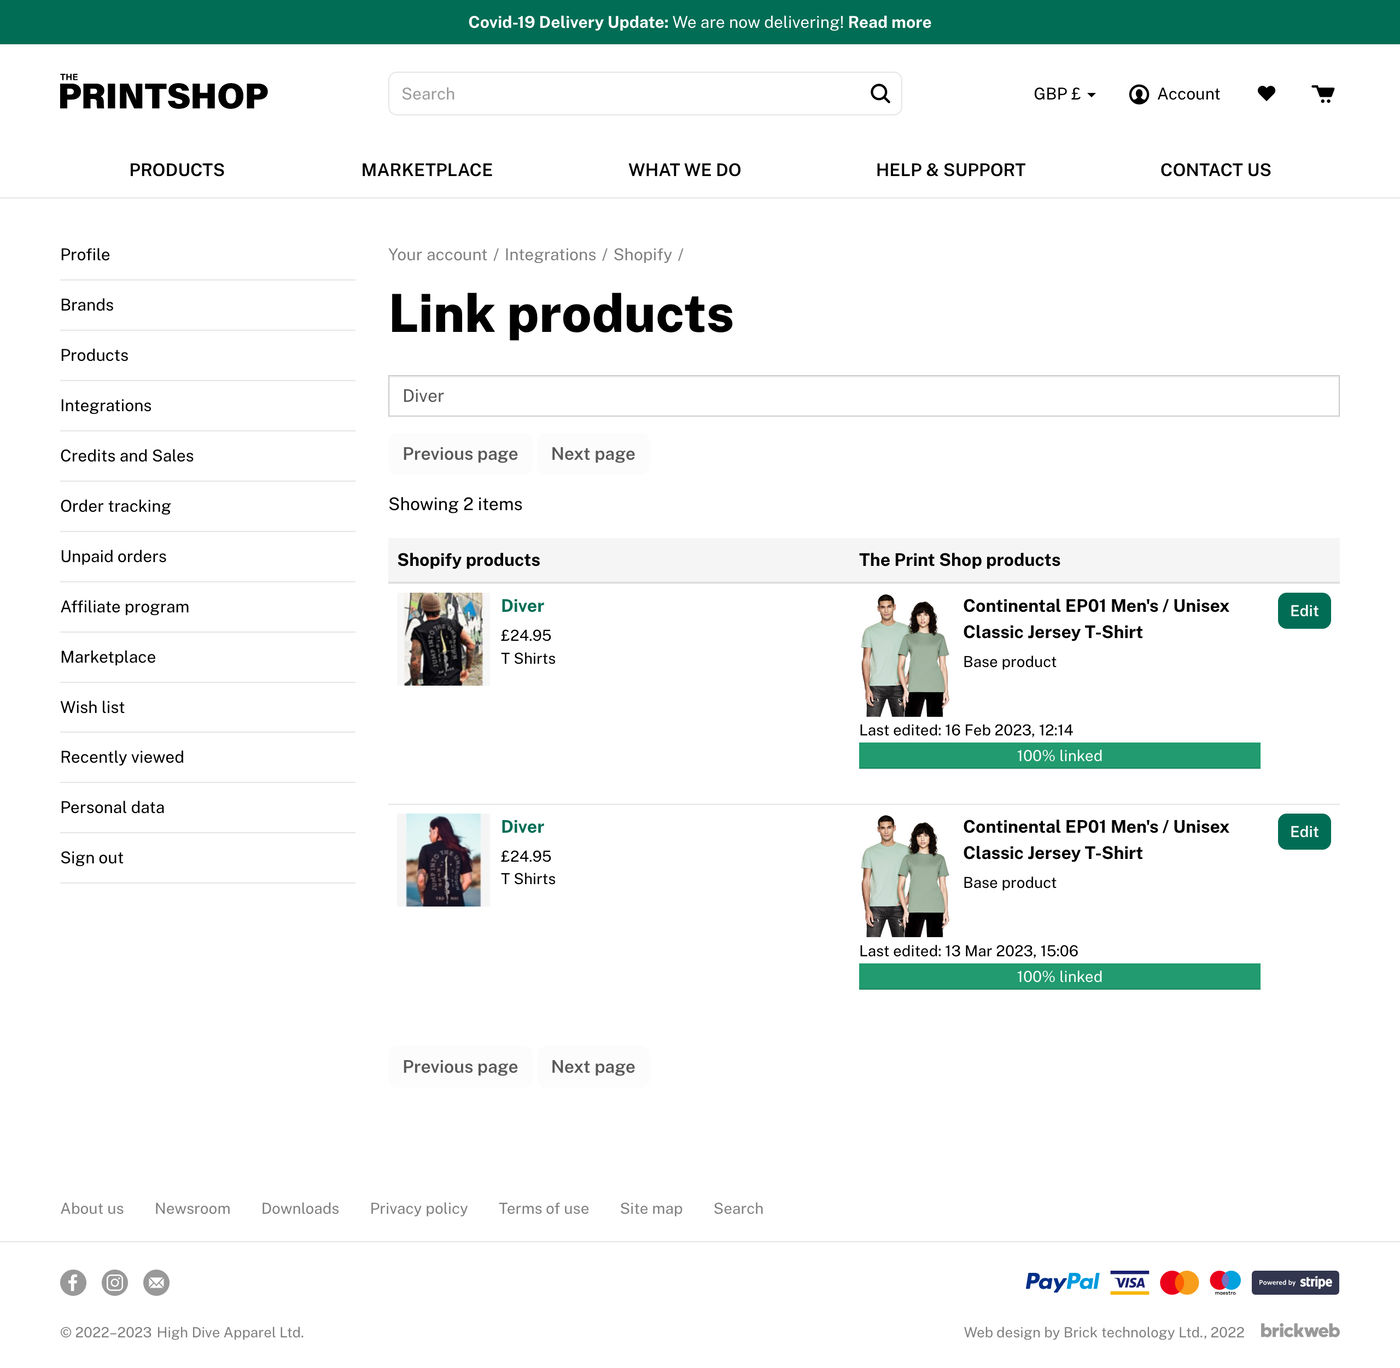 The Print Shop Link Products